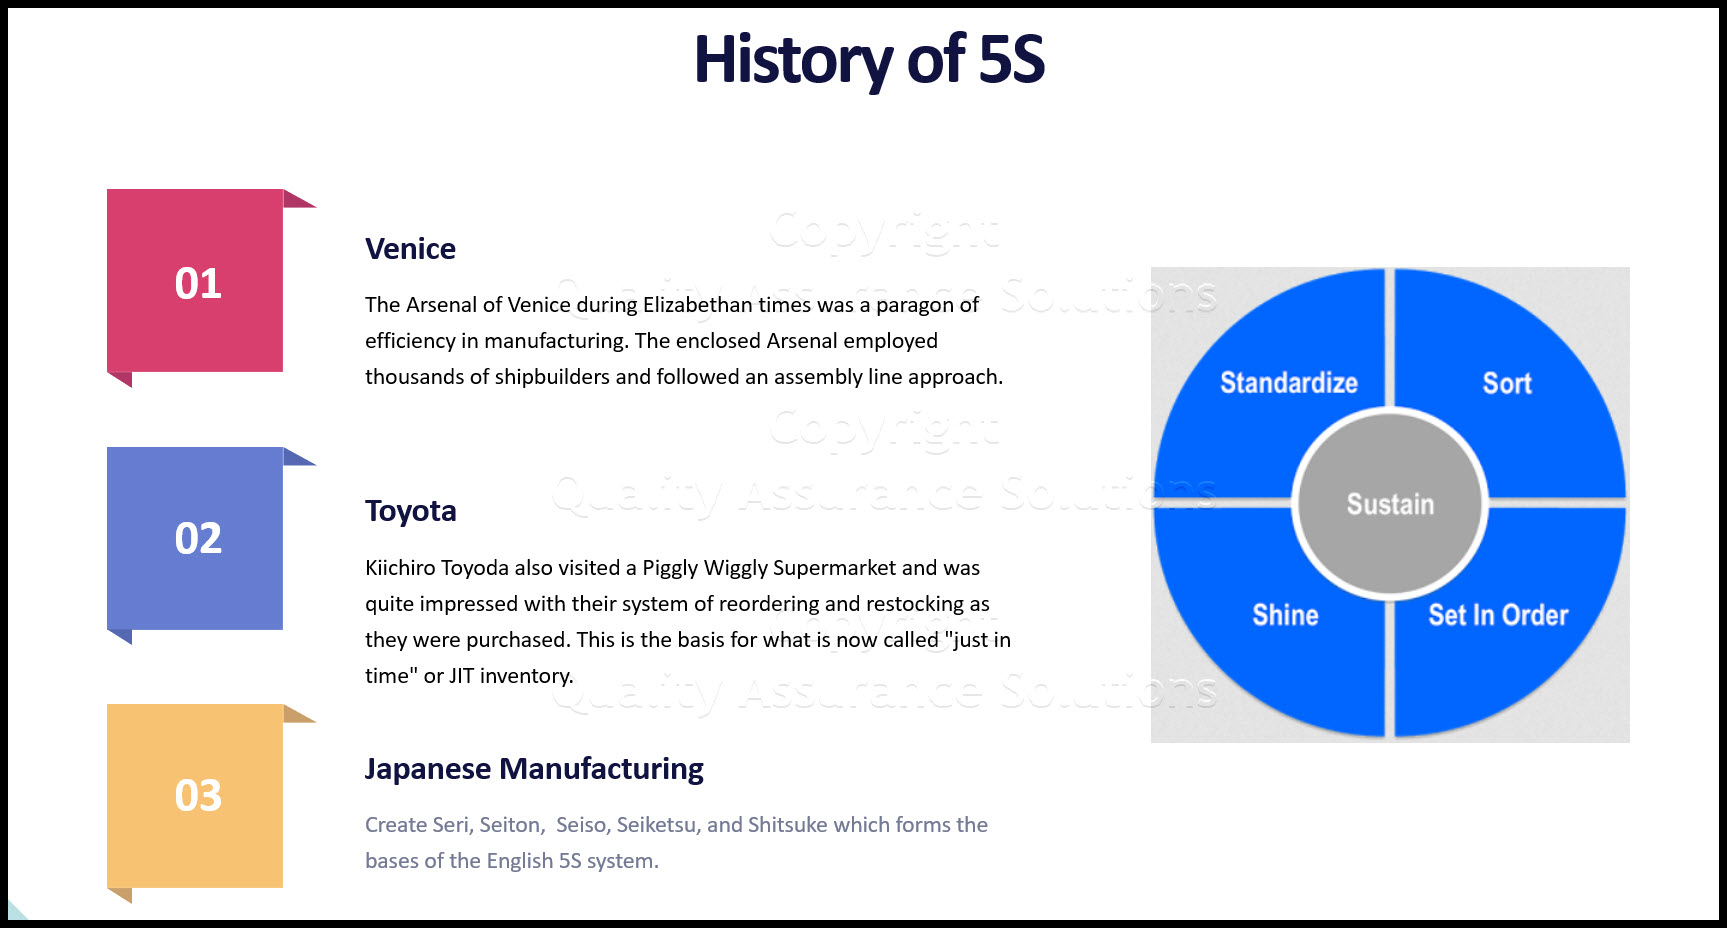 The history of 5S began in Japan after World War II. It represents a system of organization, cleanliness, and standardization.